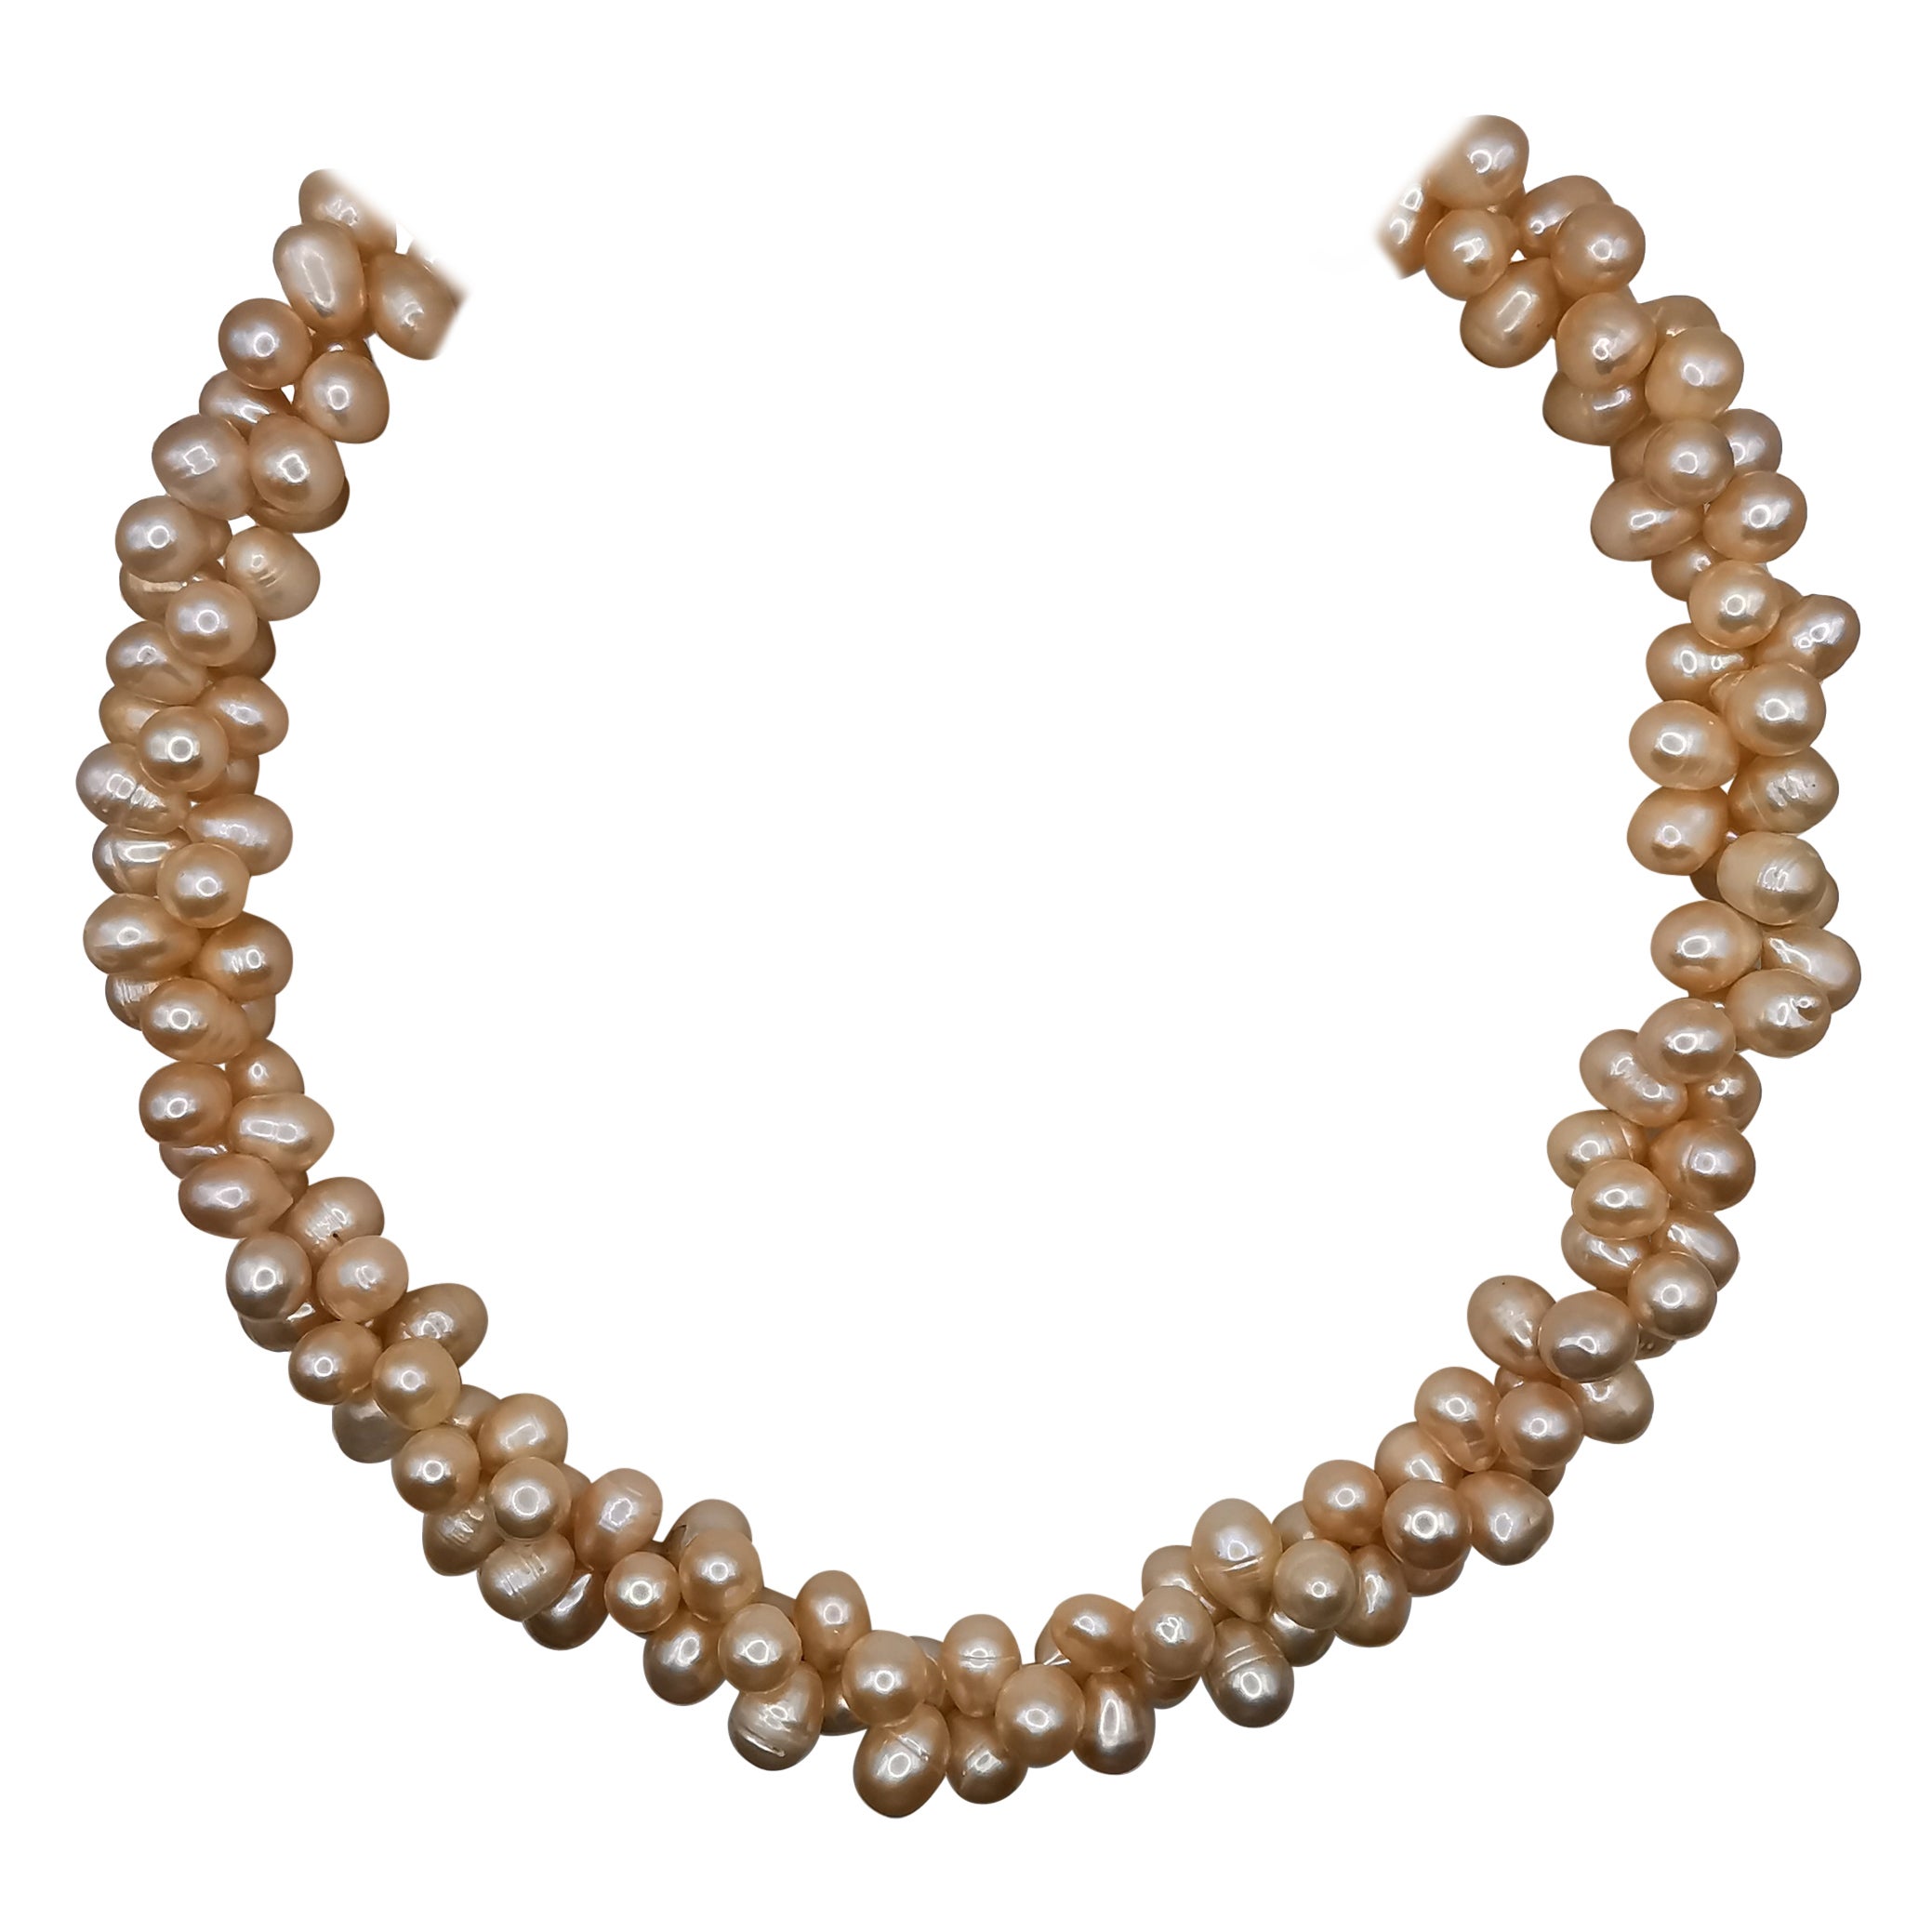 Dual Twisted Freshwater Cultured Baroque Peach Pearl Necklace